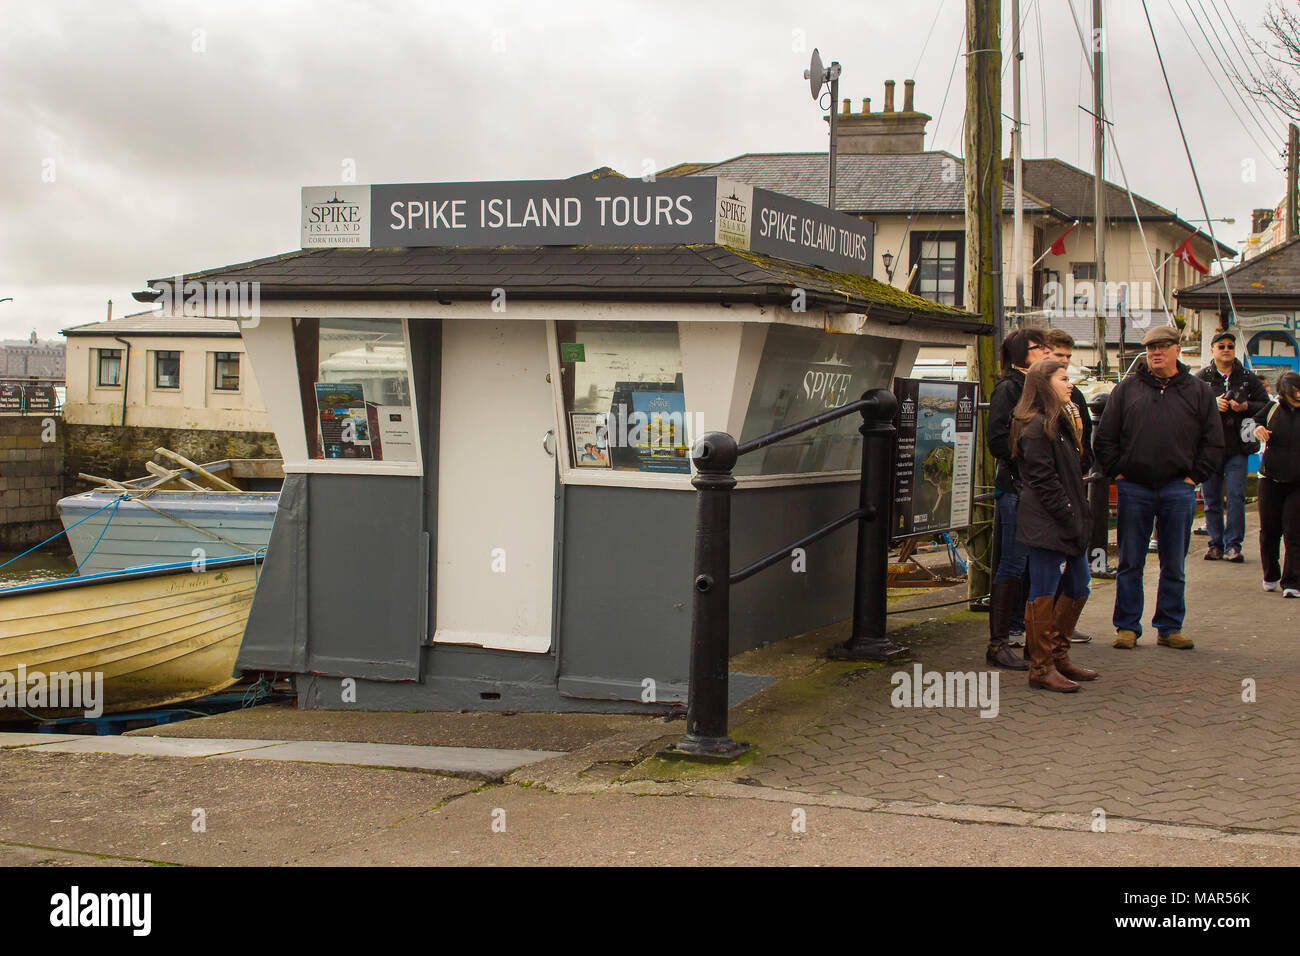 16 March 2018 Tourists gather on the main street beside the Spike Island Tour Centre in the famous town of Cobh Ireland Stock Photo